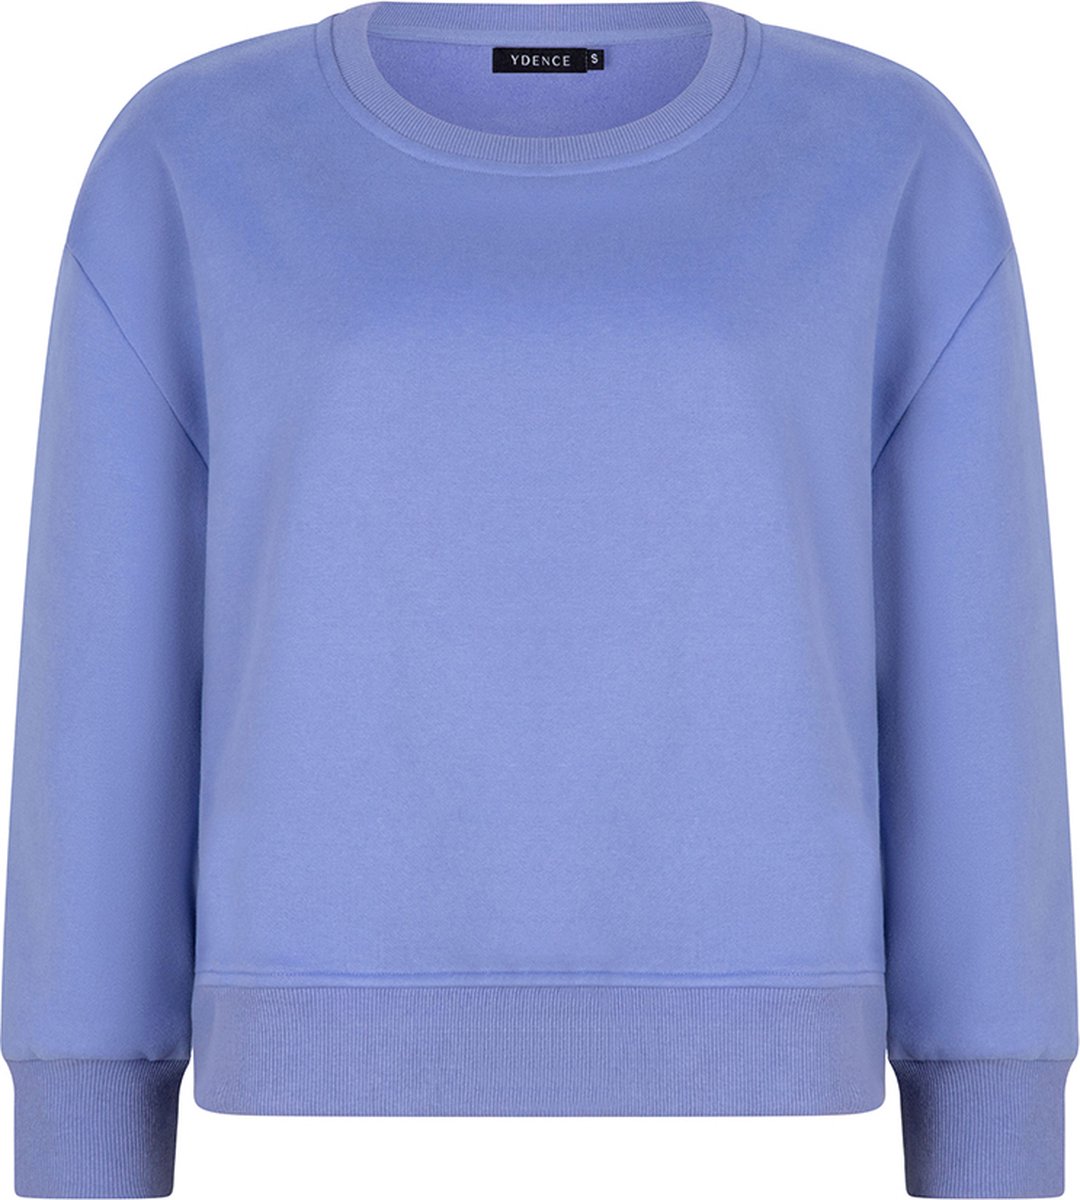 Ydence Sweater Lucy Blue - Maat XS